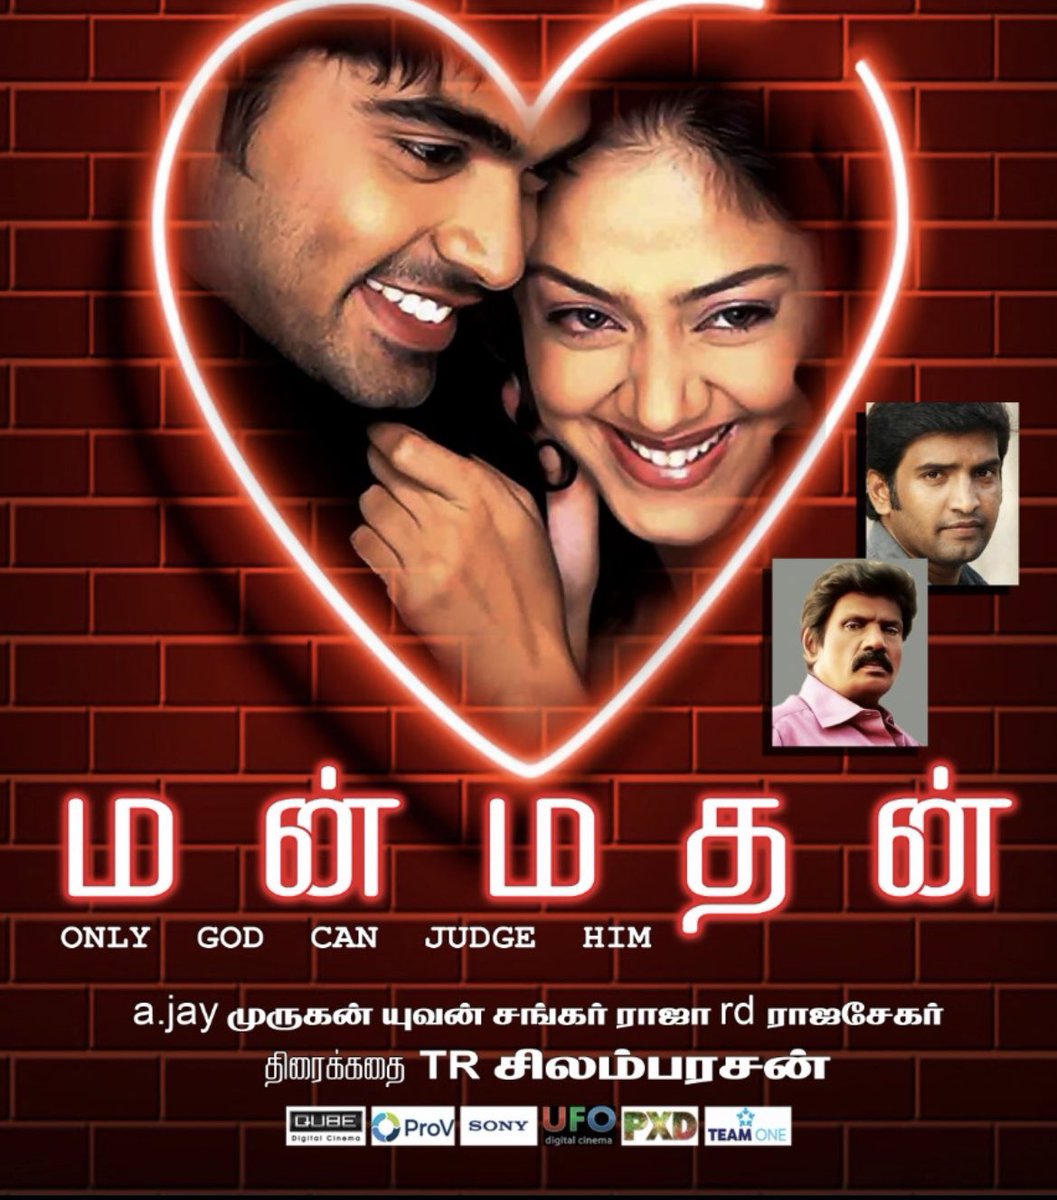 For you STR fans 🥂 #Manmadhan in your national from tommorrow.